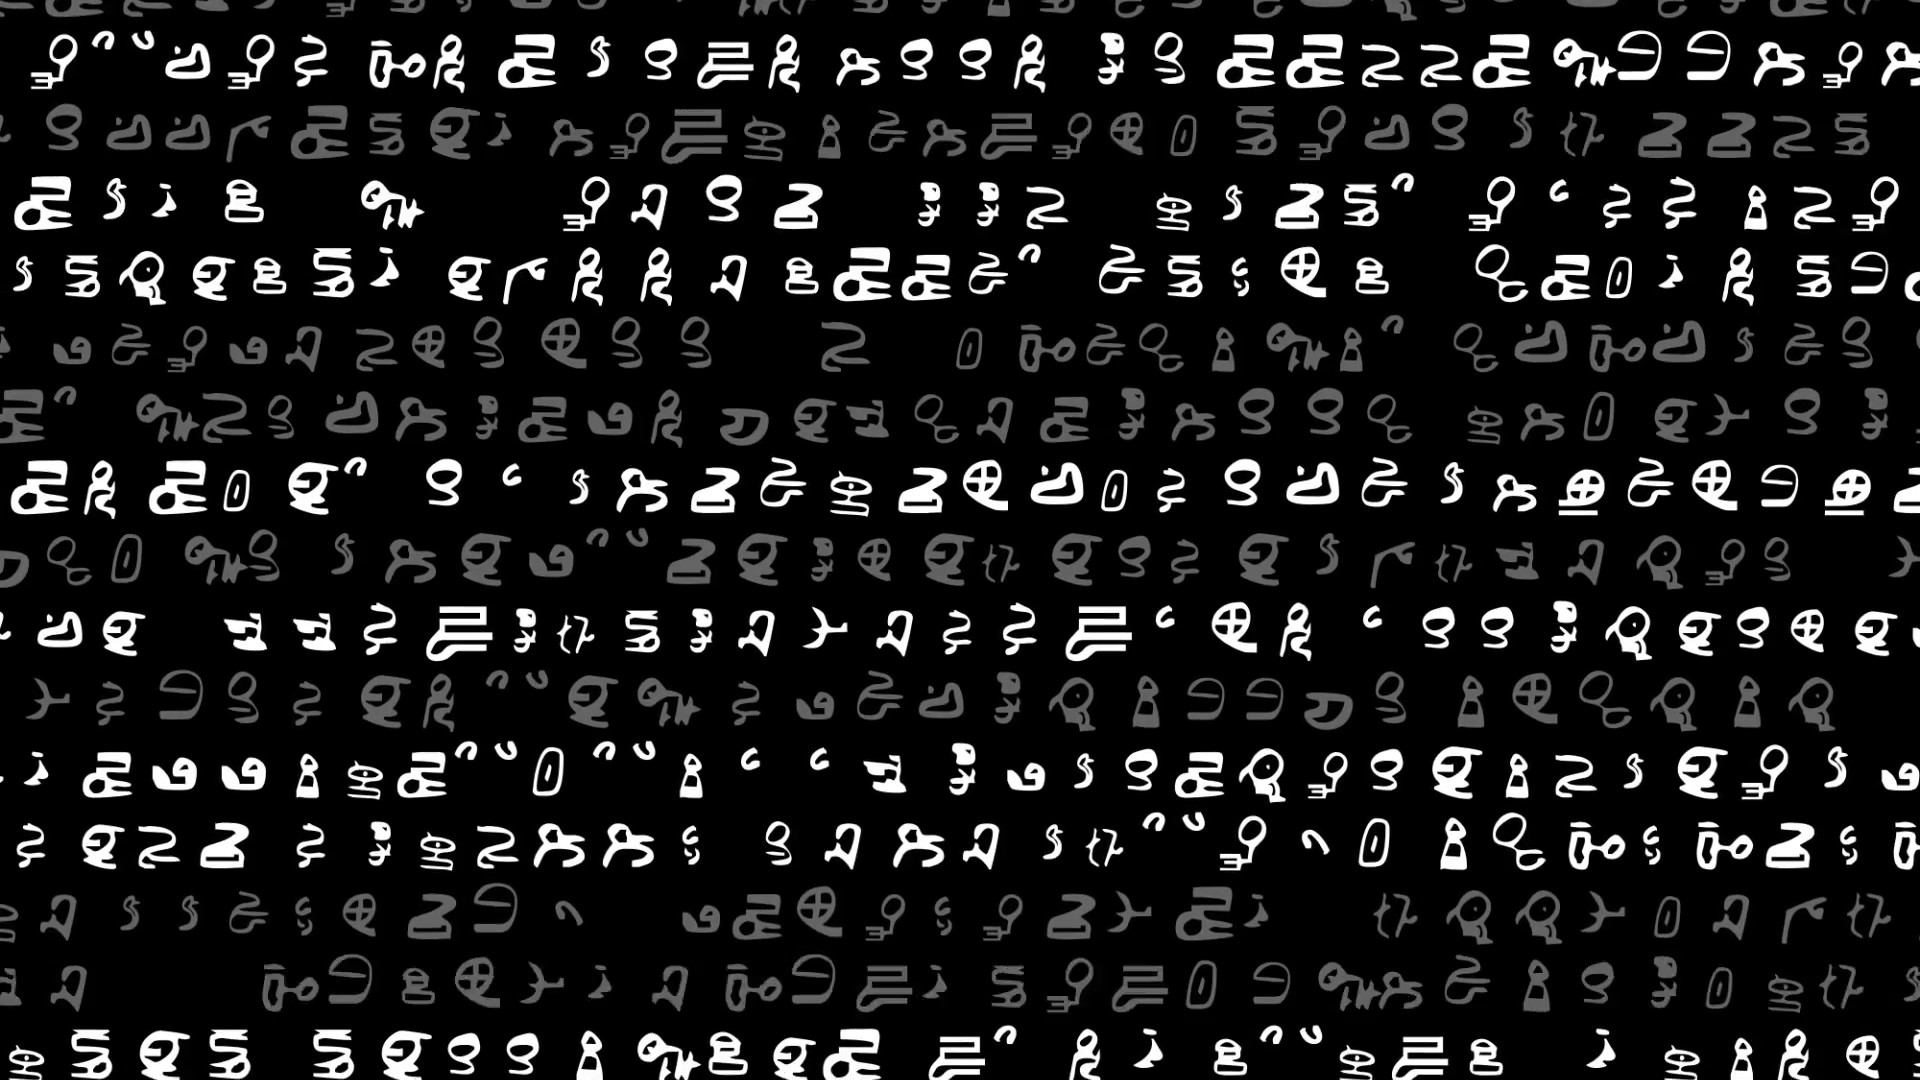 1920x1080 Video Background 1146: A screen of scrolling text, alien letters or code.